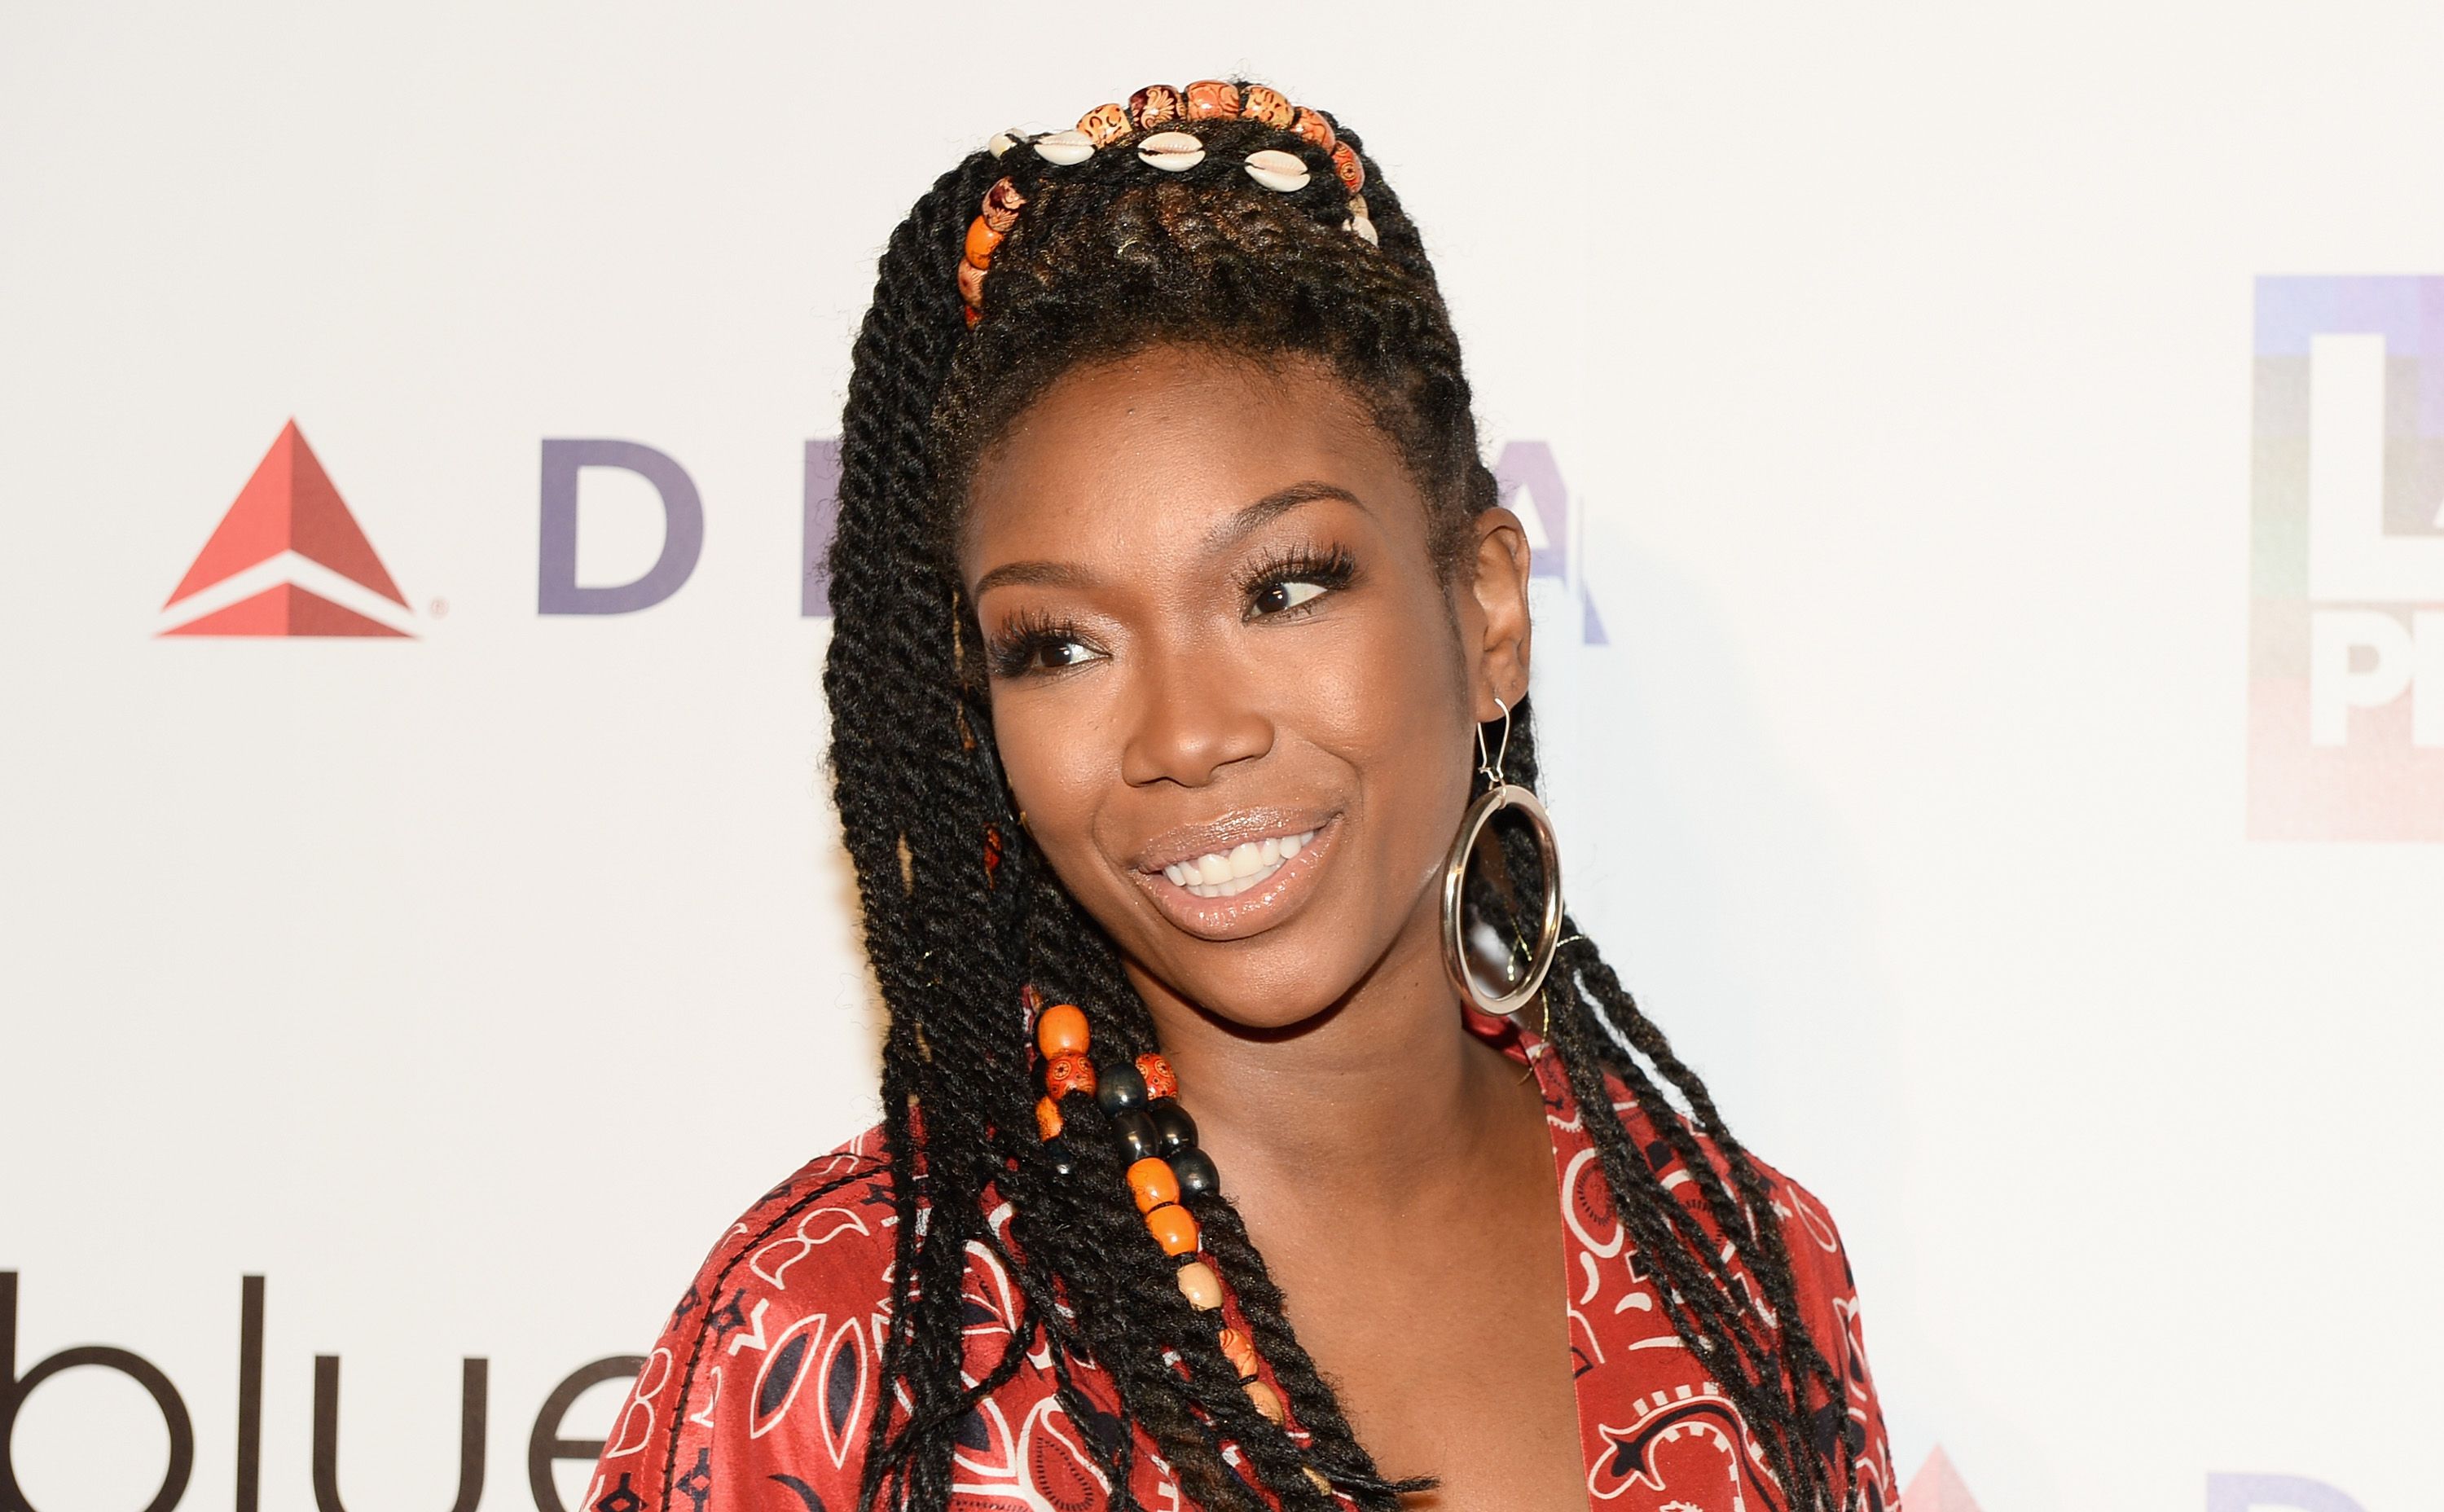 Brandy Norwood during the LA Pride Music Festival and Parade 2017 on June 11, 2017 in West Hollywood, California. | Source: Getty Images